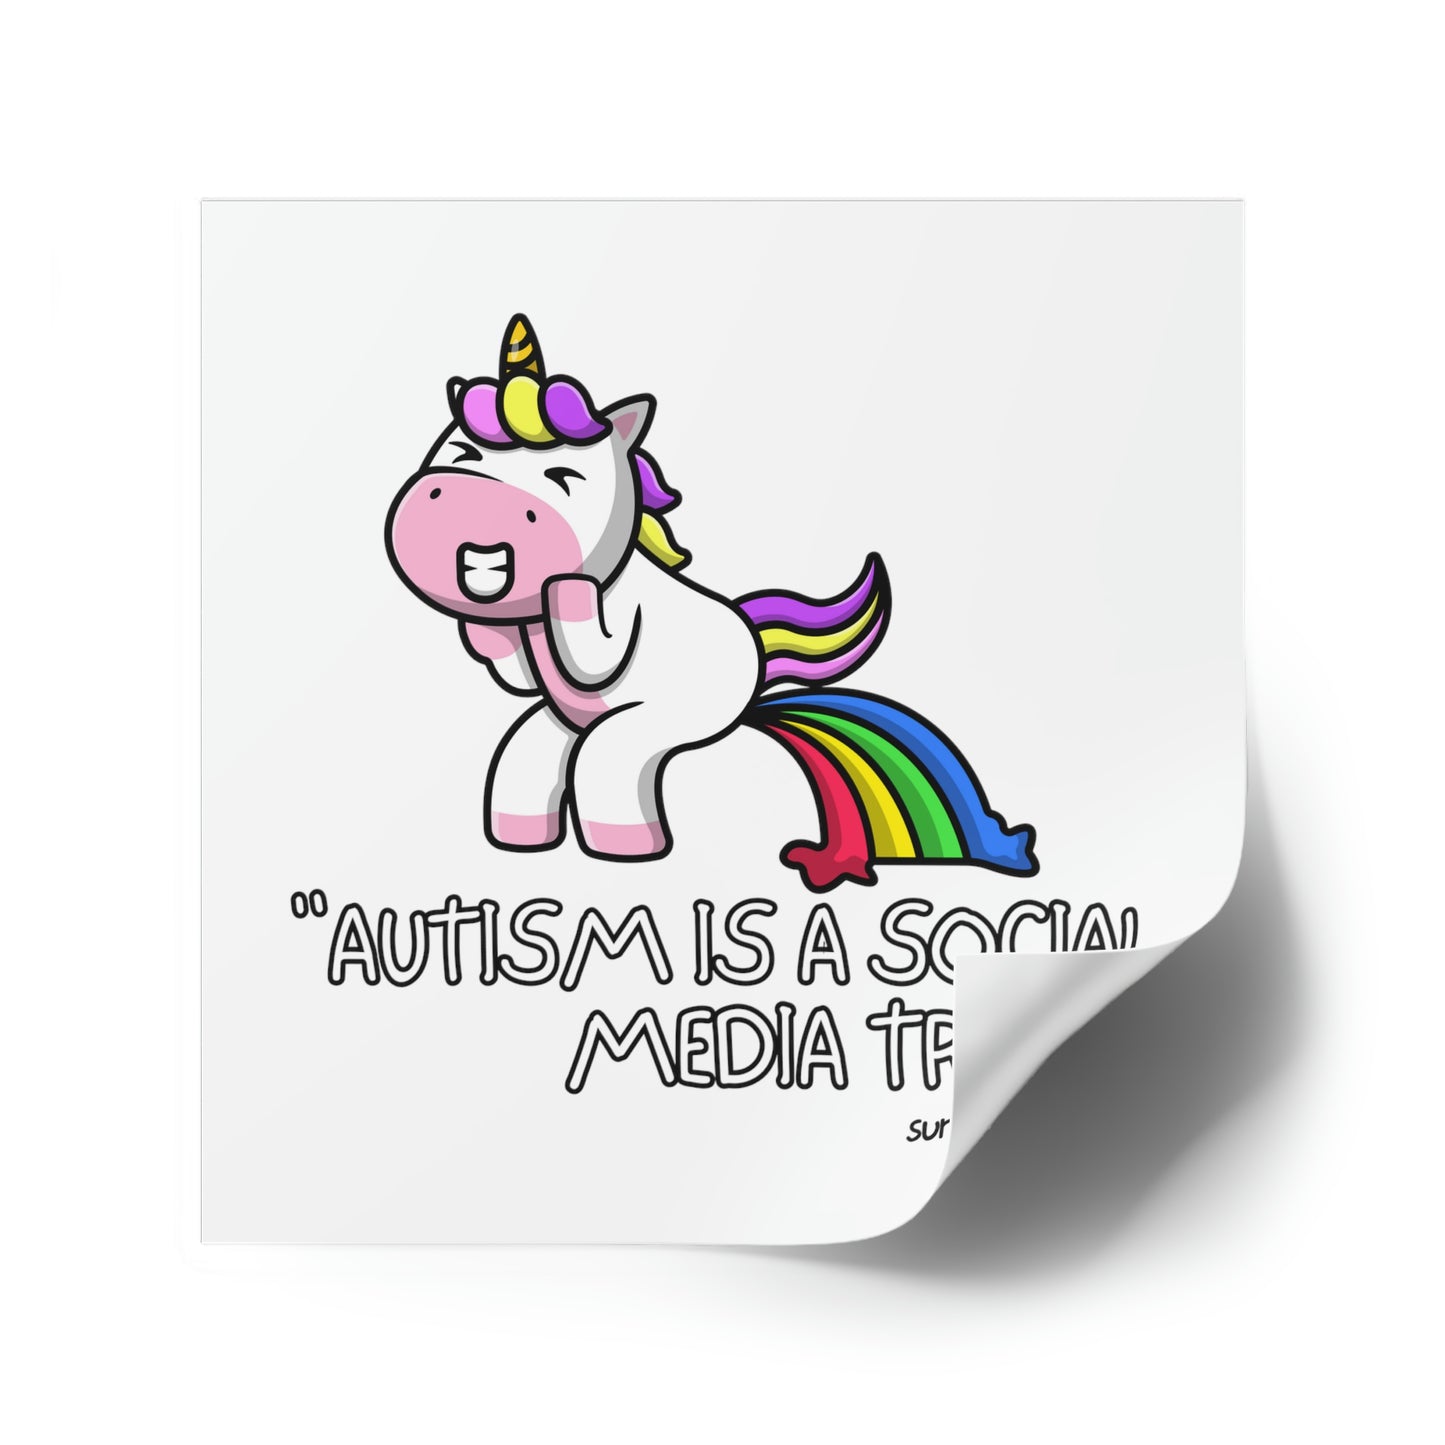 "Autism is a Social Media Trend" Square Stickers [Indoor\Outdoor]